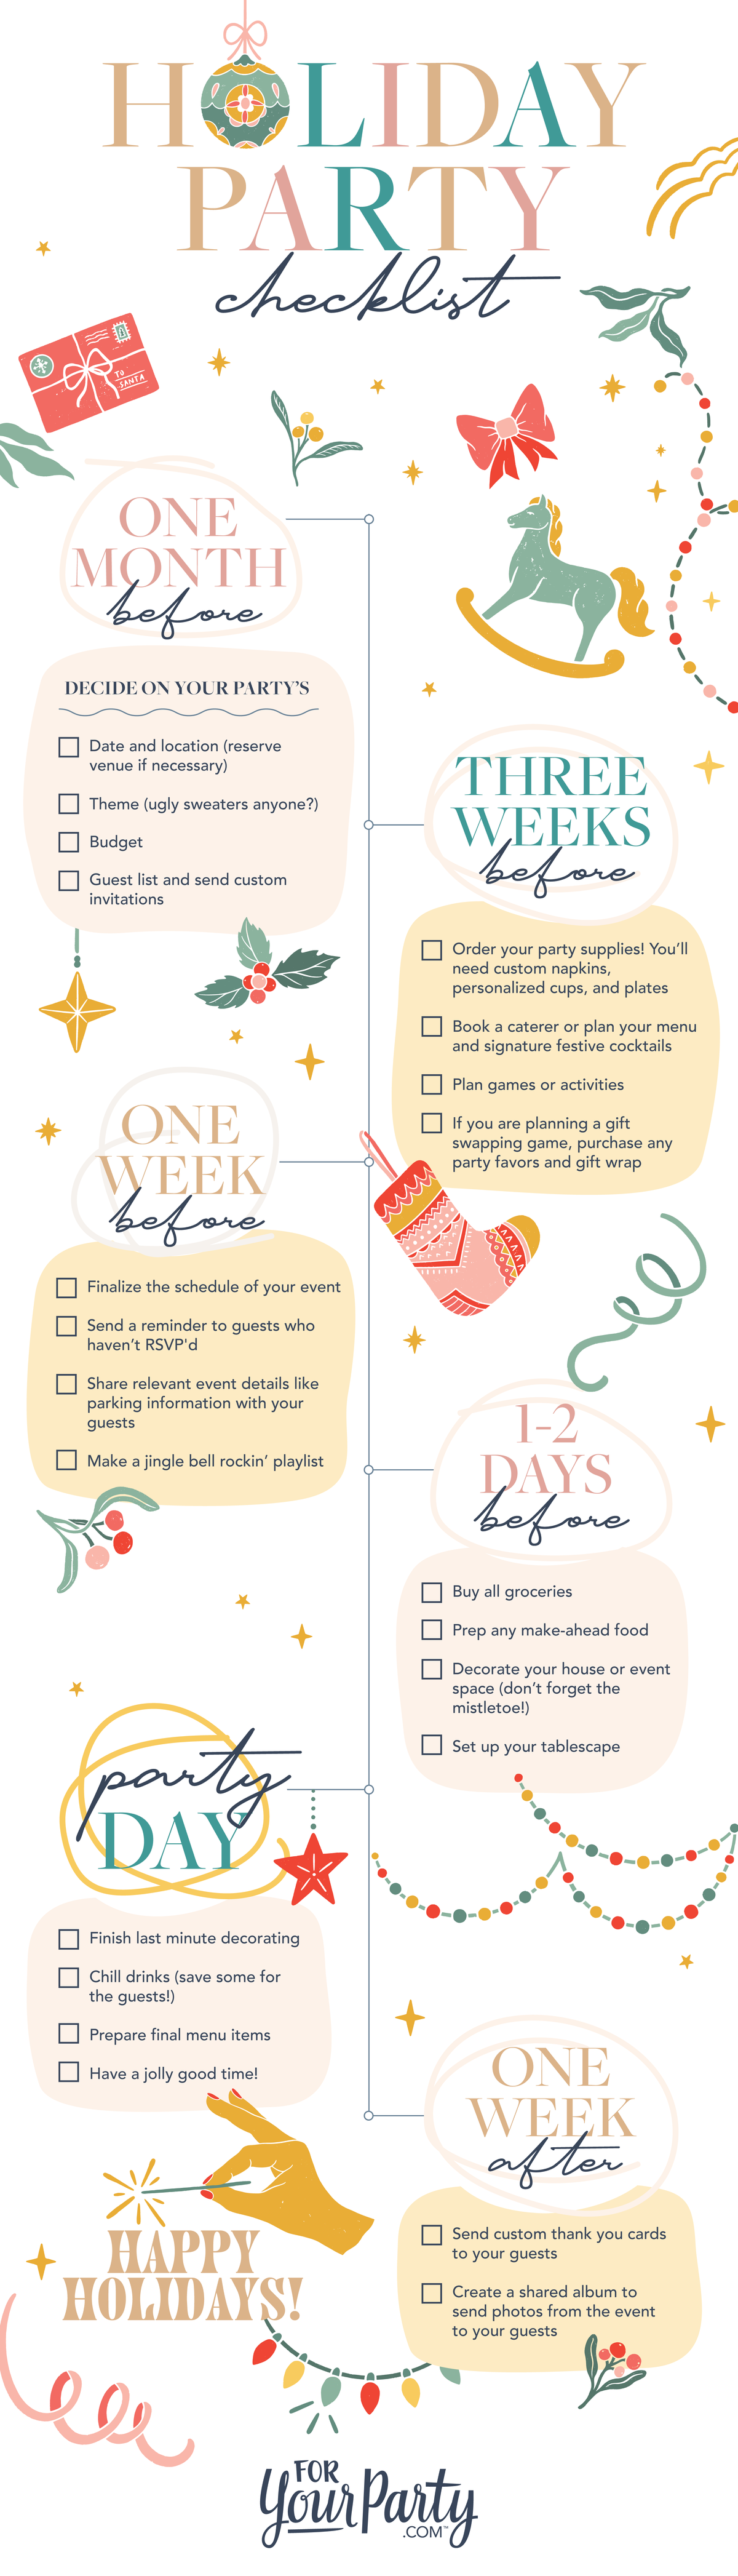 How to Prep for the Holidays: Your Holiday Hosting Essentials Guide